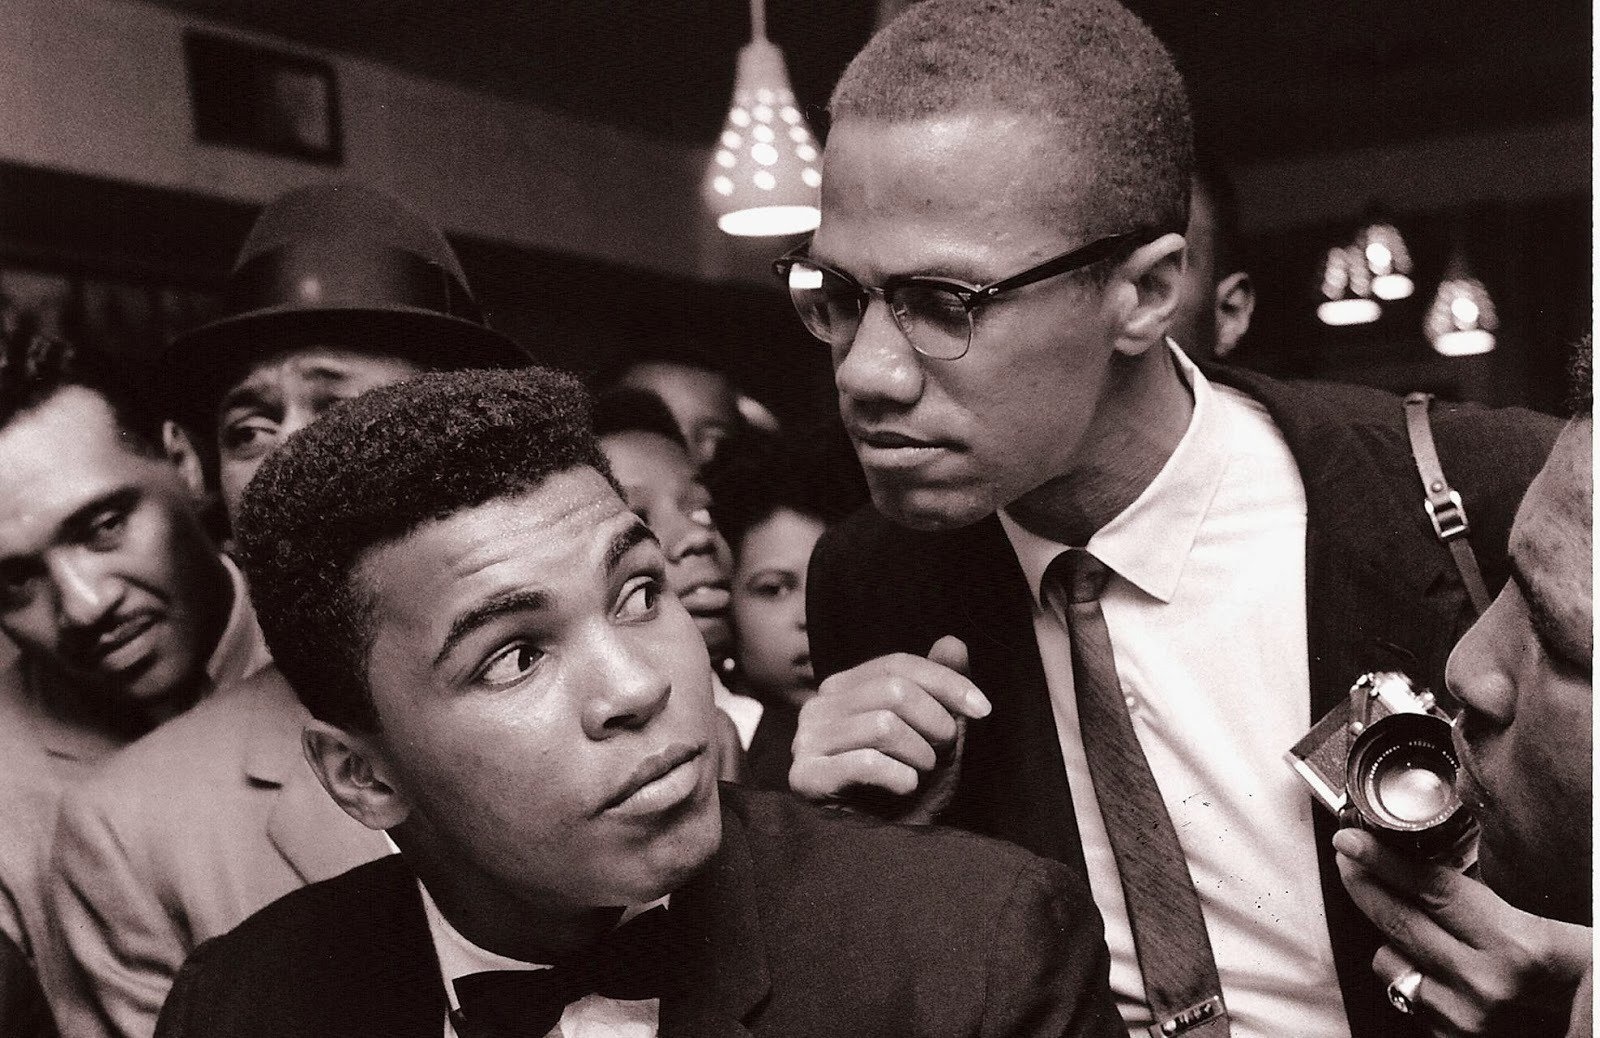 Malcolm X kidding around with Muhammad Ali in 1963.